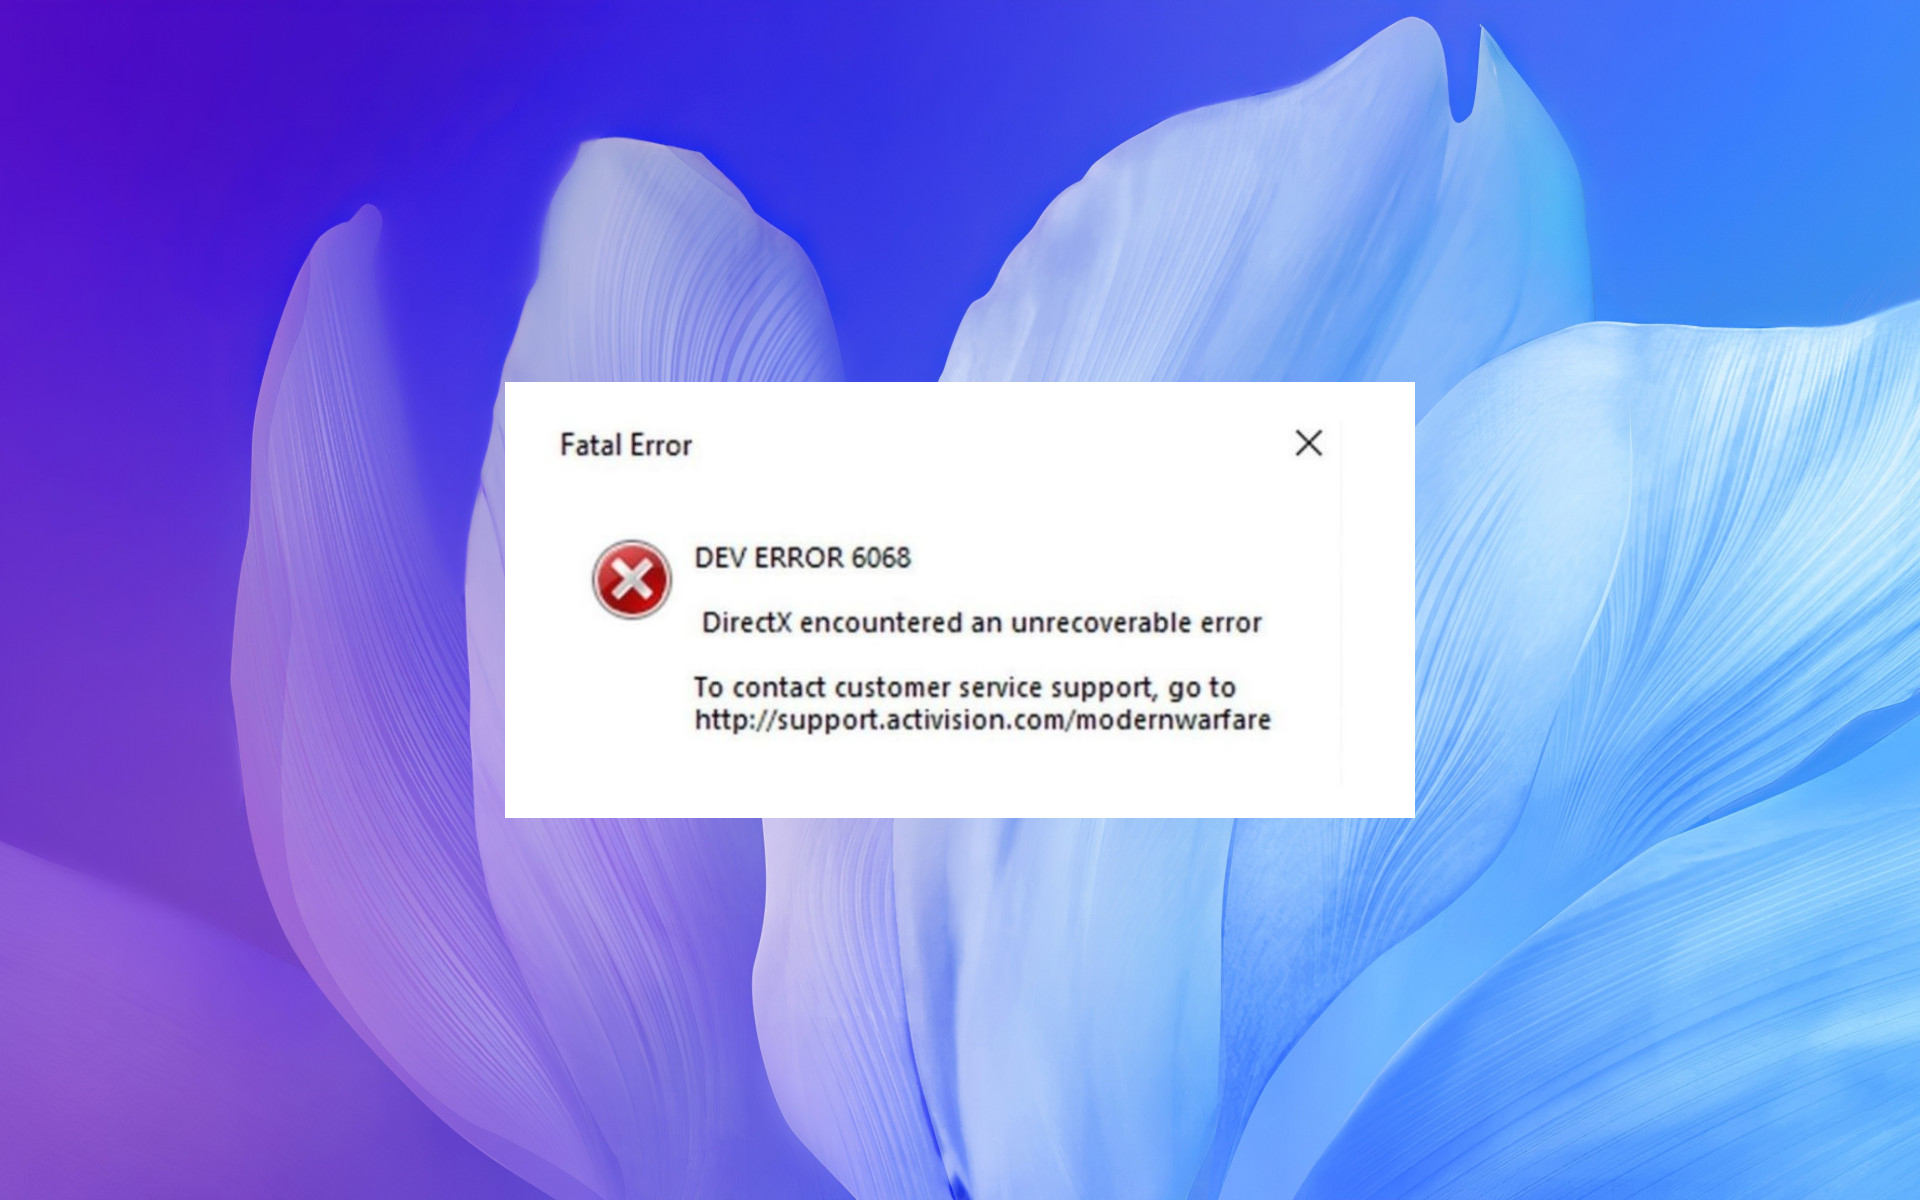 FIXED] Roblox The Application Encountered An Unrecoverable Error 2023 